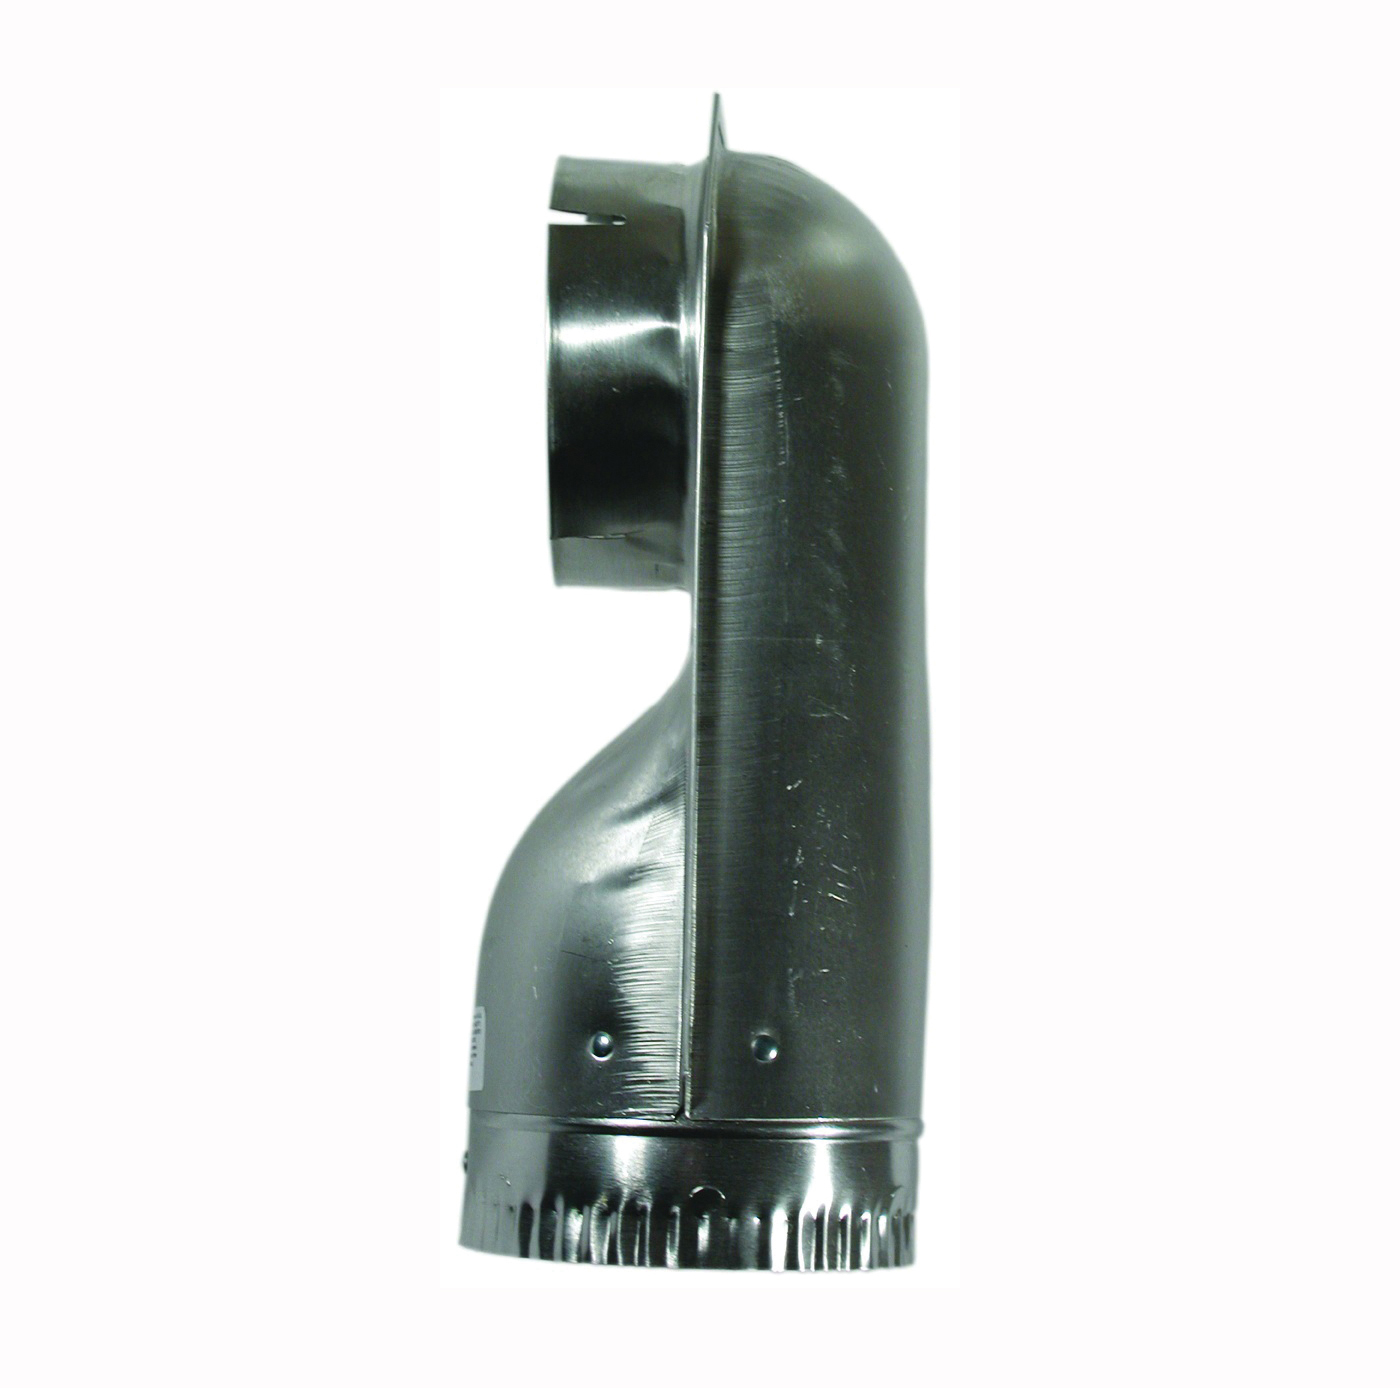 SAF-T-DUCT 010155 Offset Elbow, 4.2 in Connection, Male x Female Thread, Aluminum